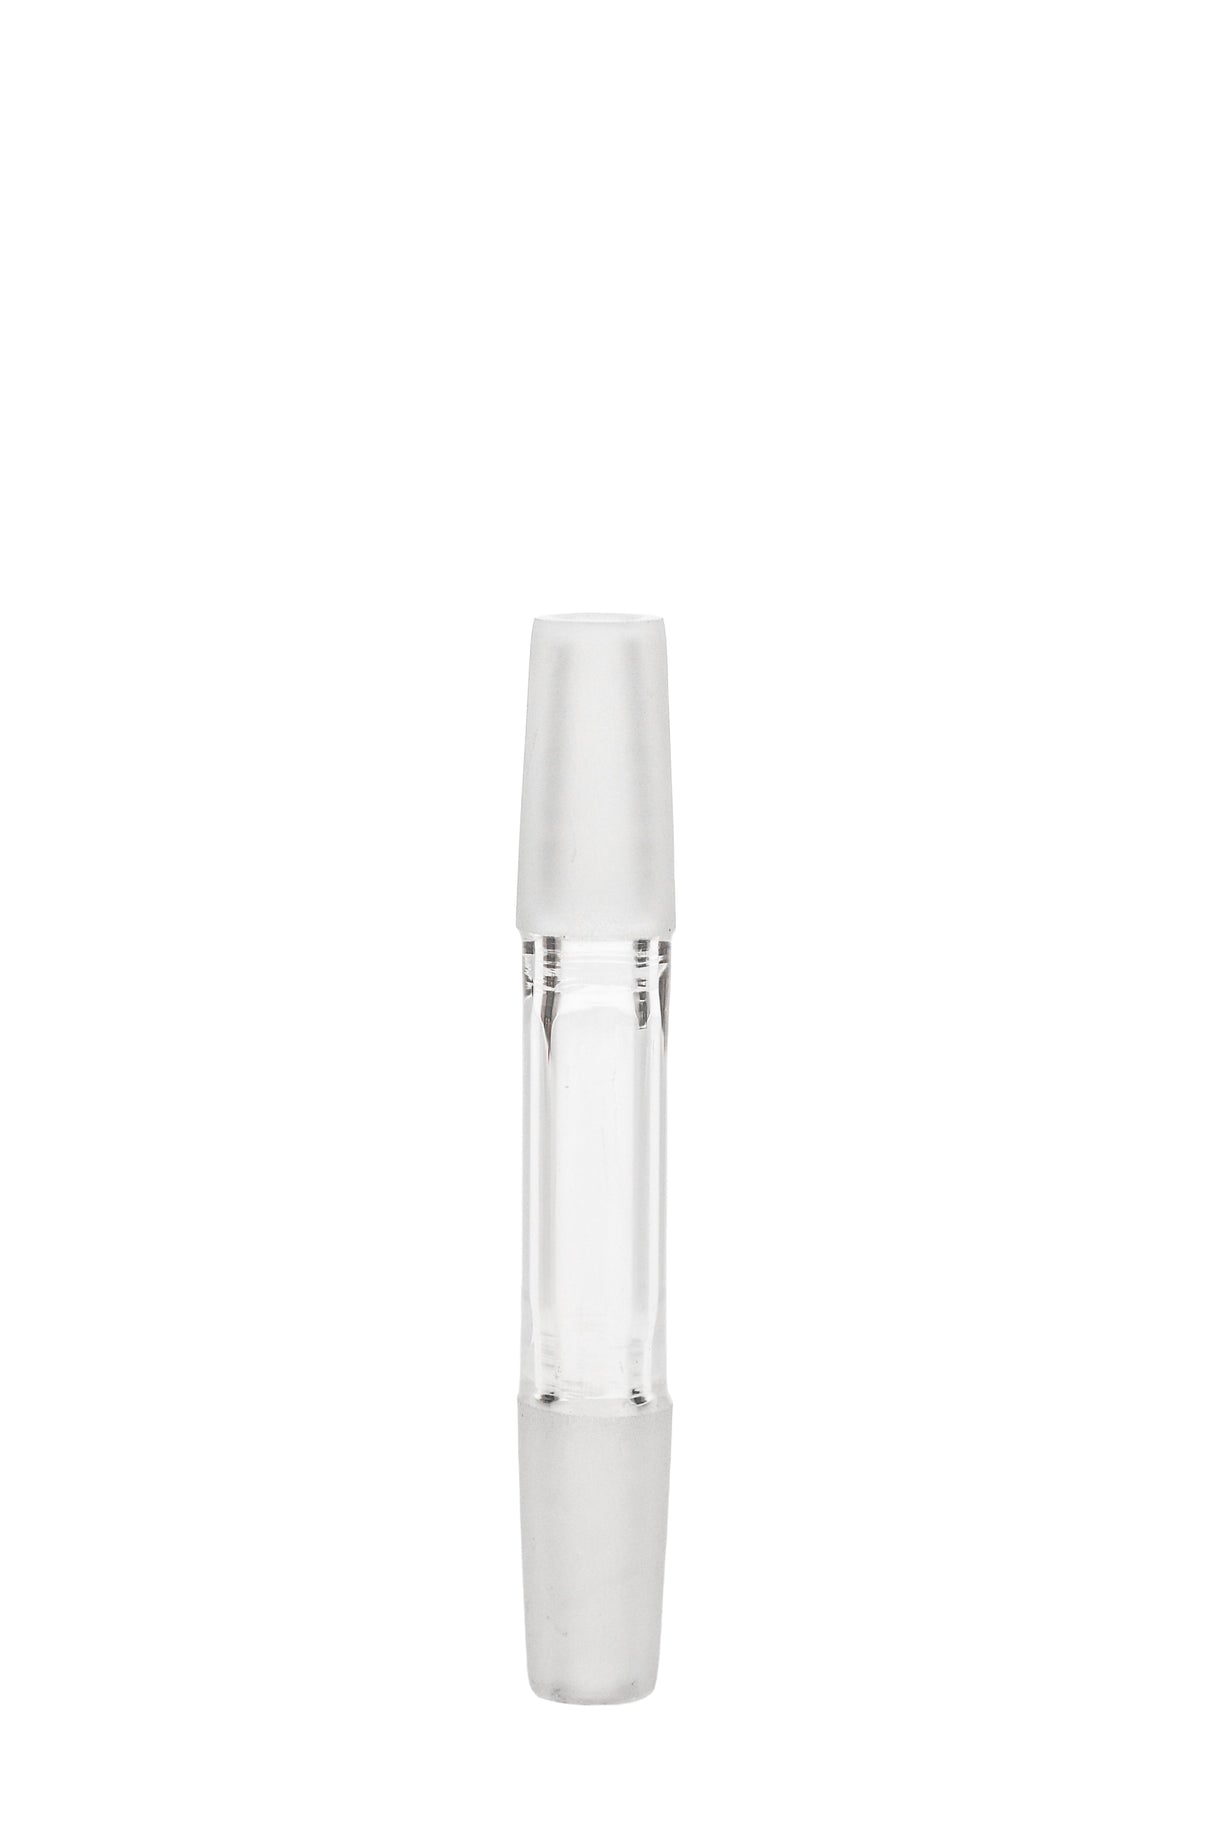 Thick Ass Glass Double Male Adapter for Bong, 14mm to 10mm, Front View on White Background